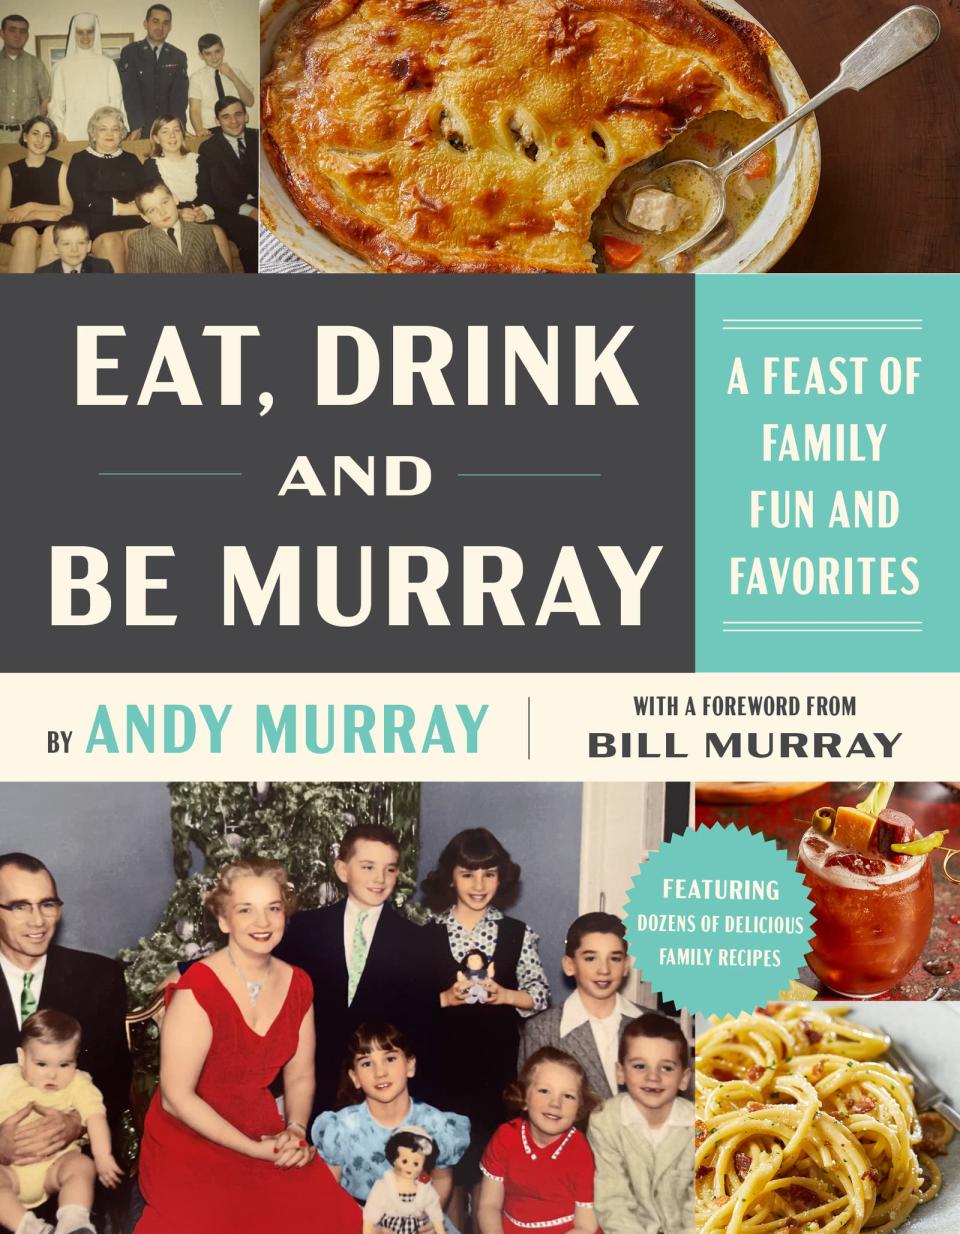 "Eat, Drink and Be Murray: A Feast of Family Fun and Favorites" by Andy Murray